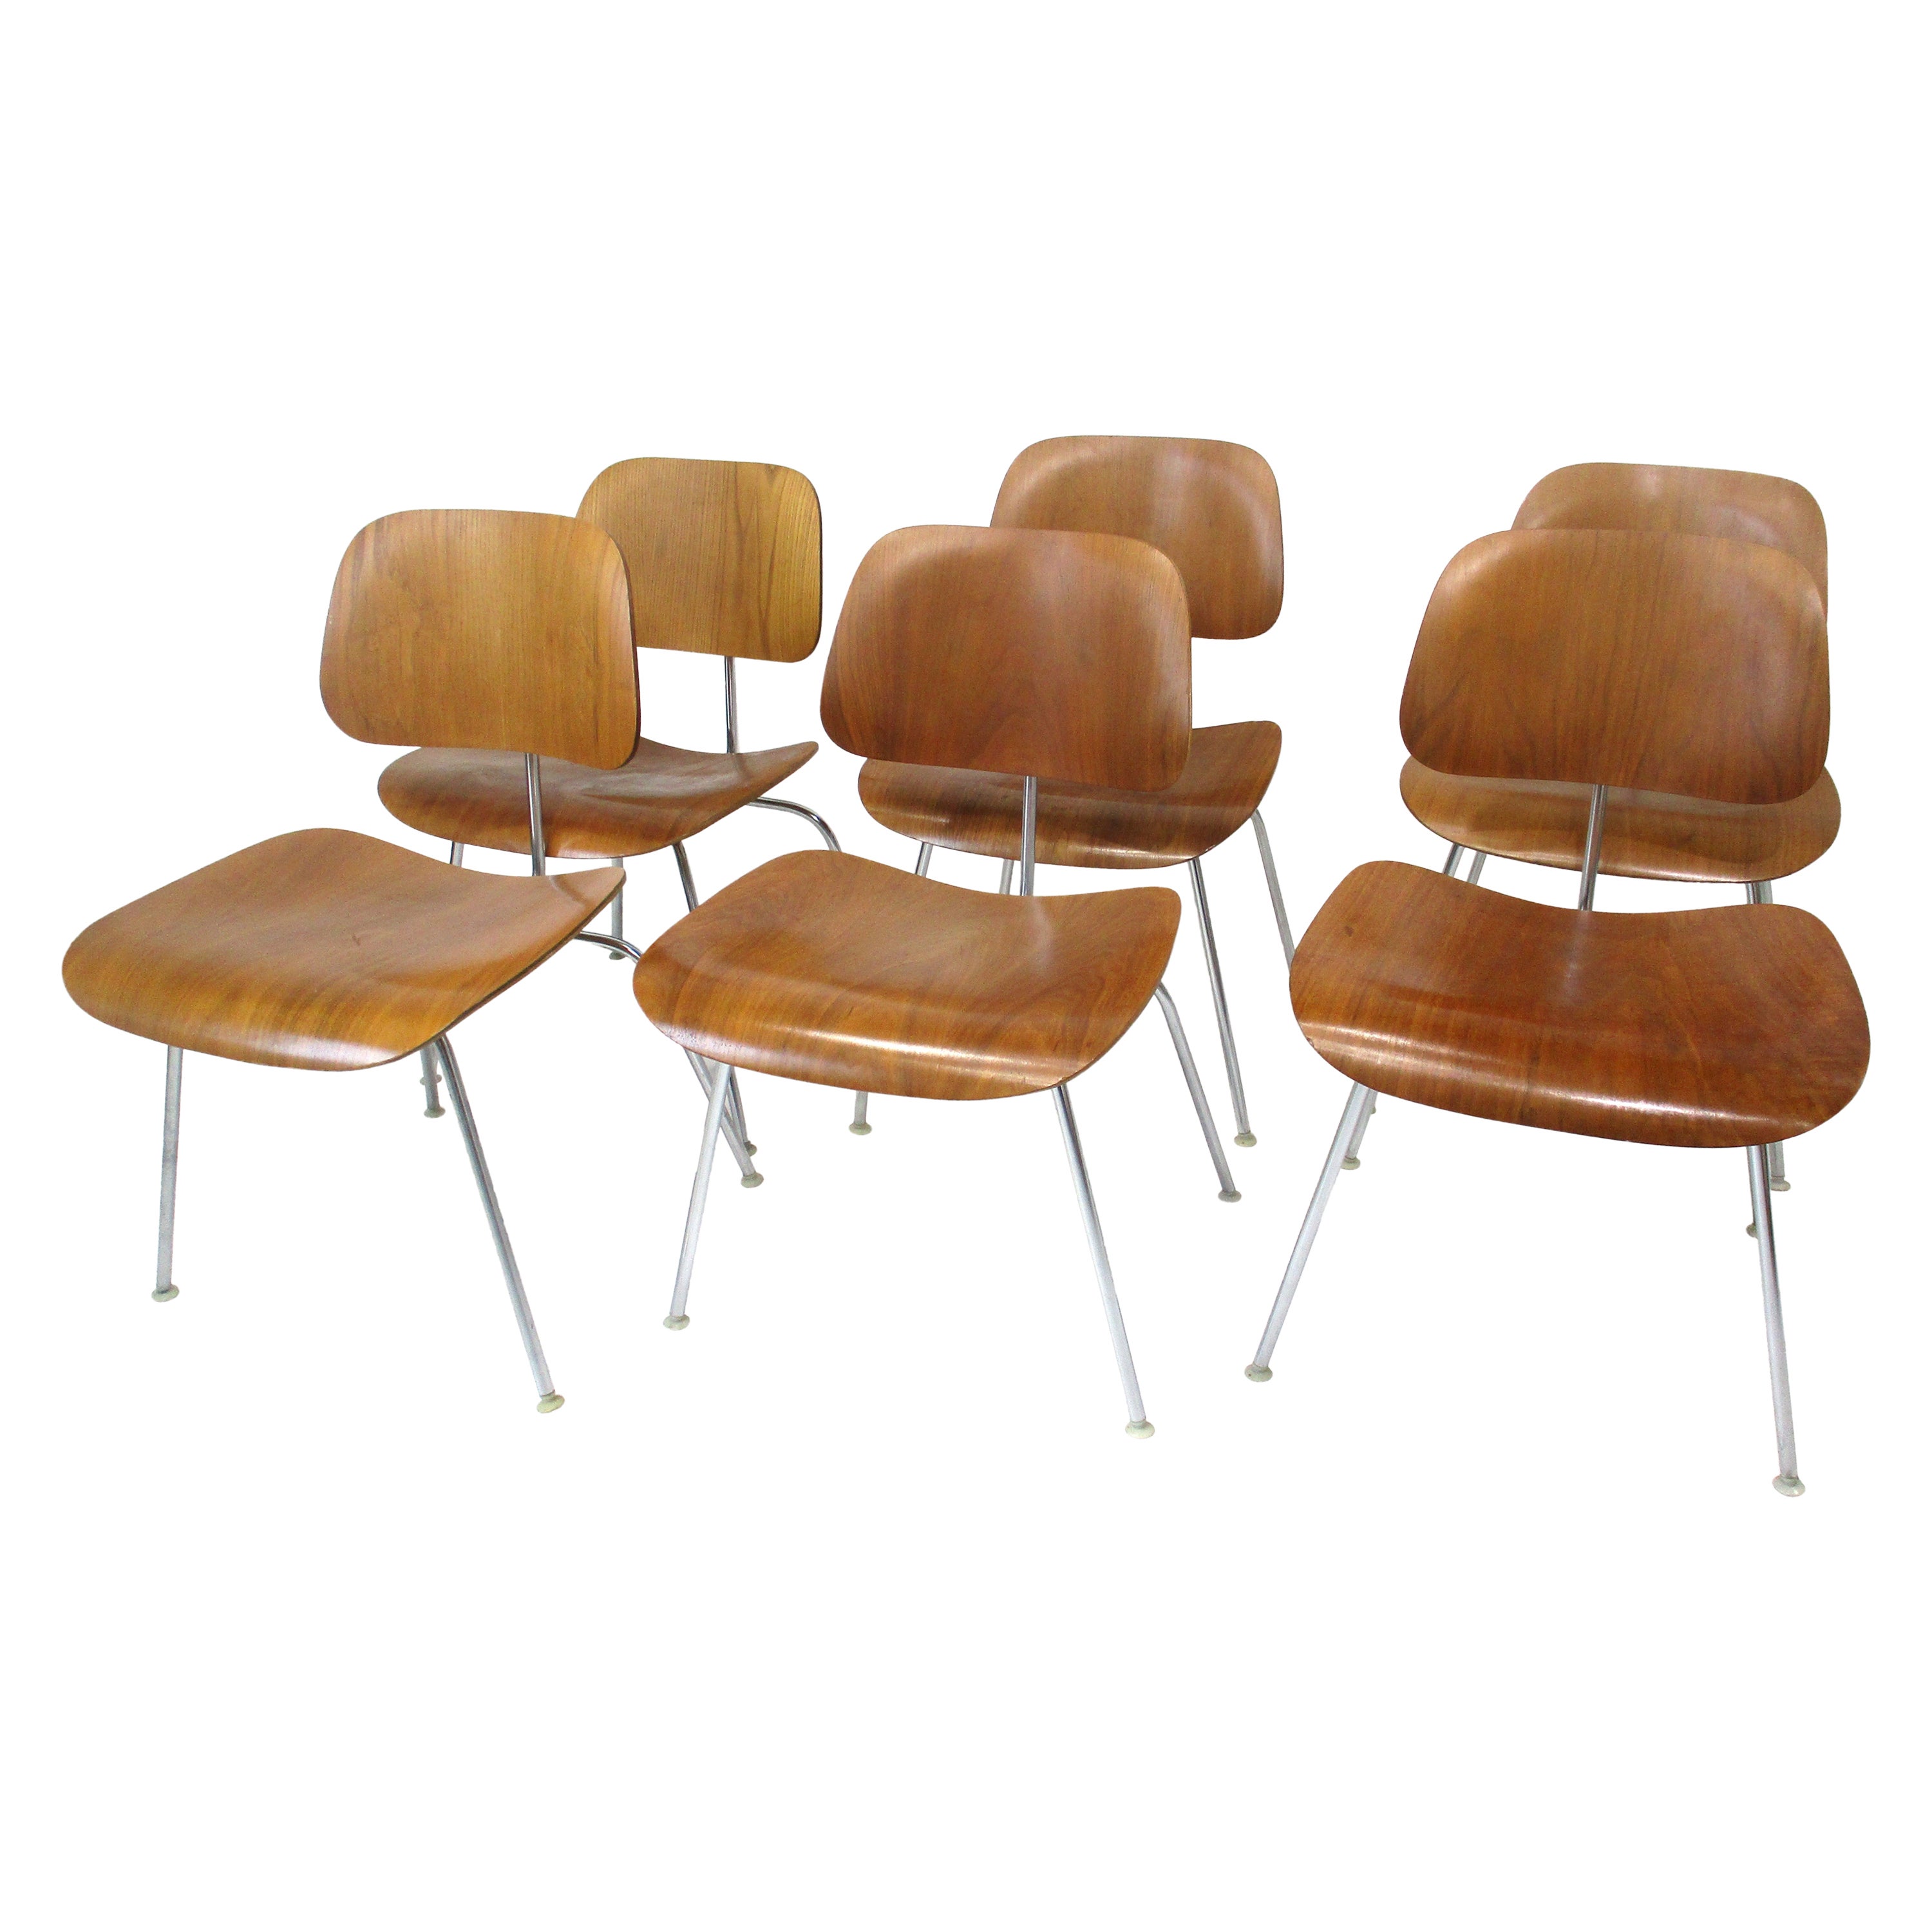 Six Eames Walnut DCM Dining Chairs for Herman Miller